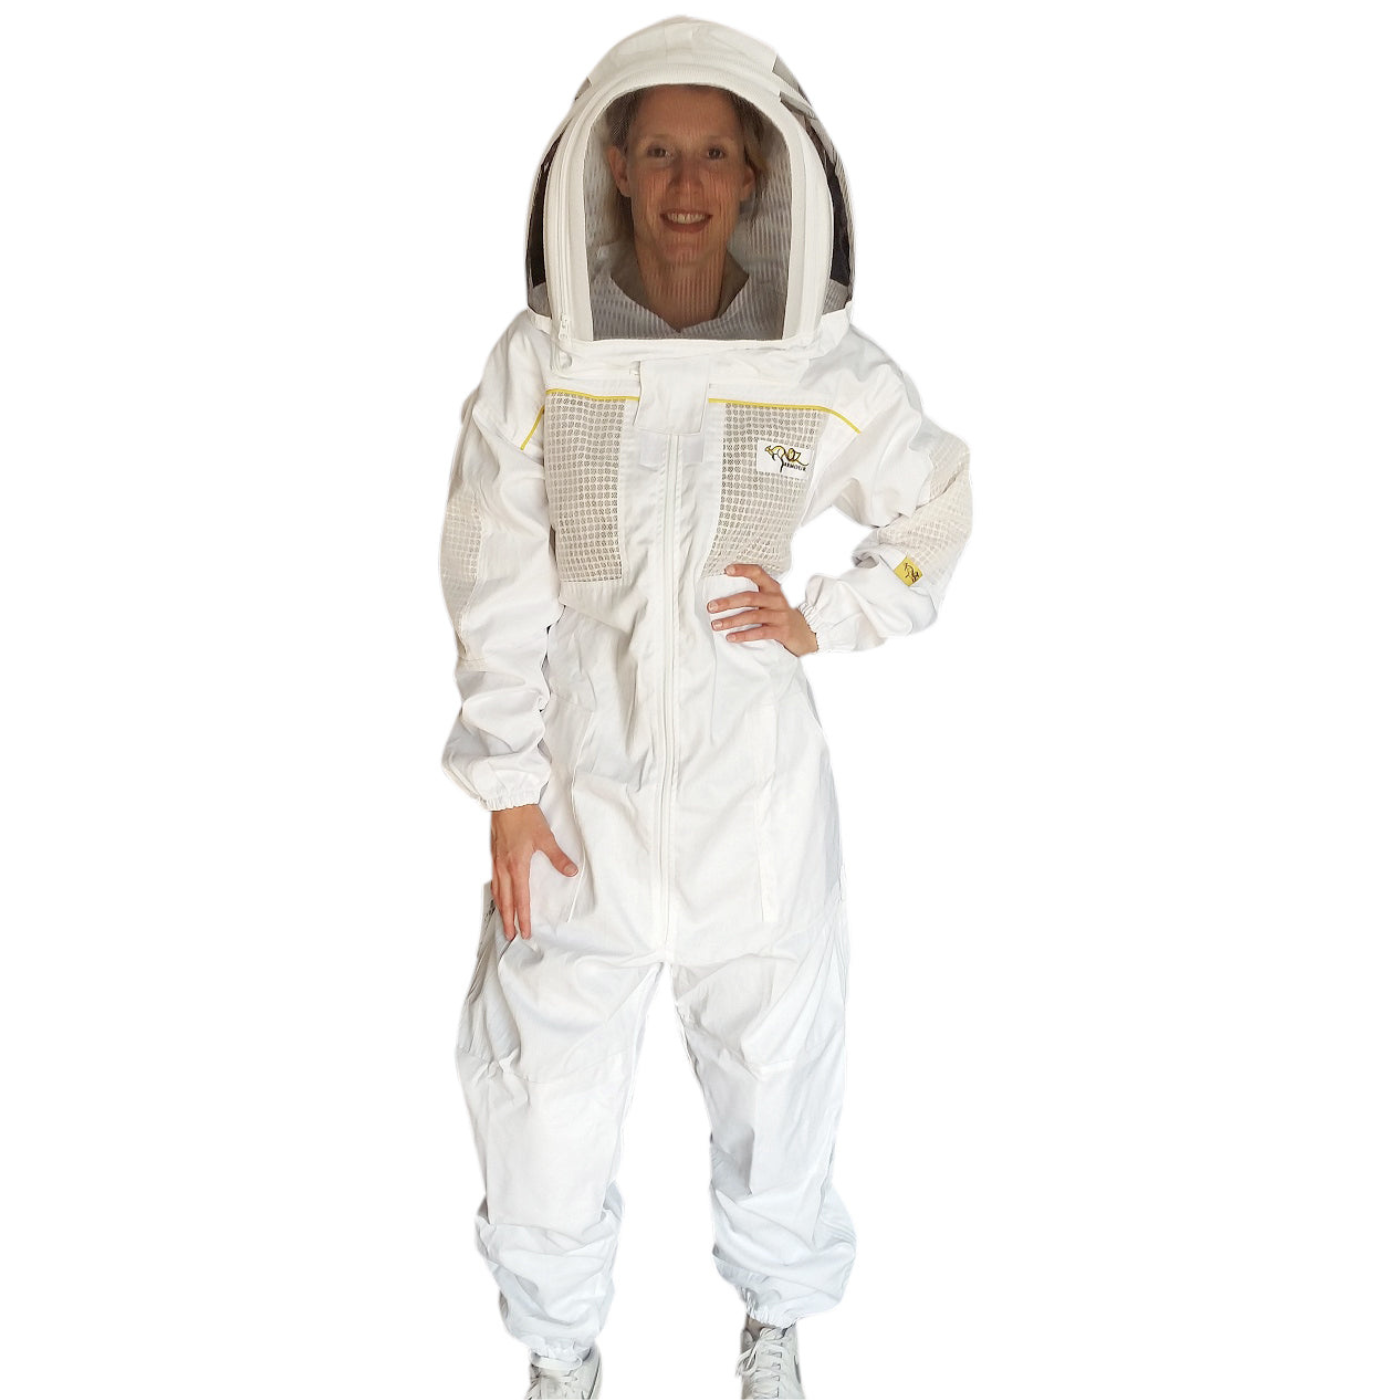 OZ ARMOUR POLY COTTON SEMI VENTILATED BEEKEEPING SUIT WITH FENCING VEIL